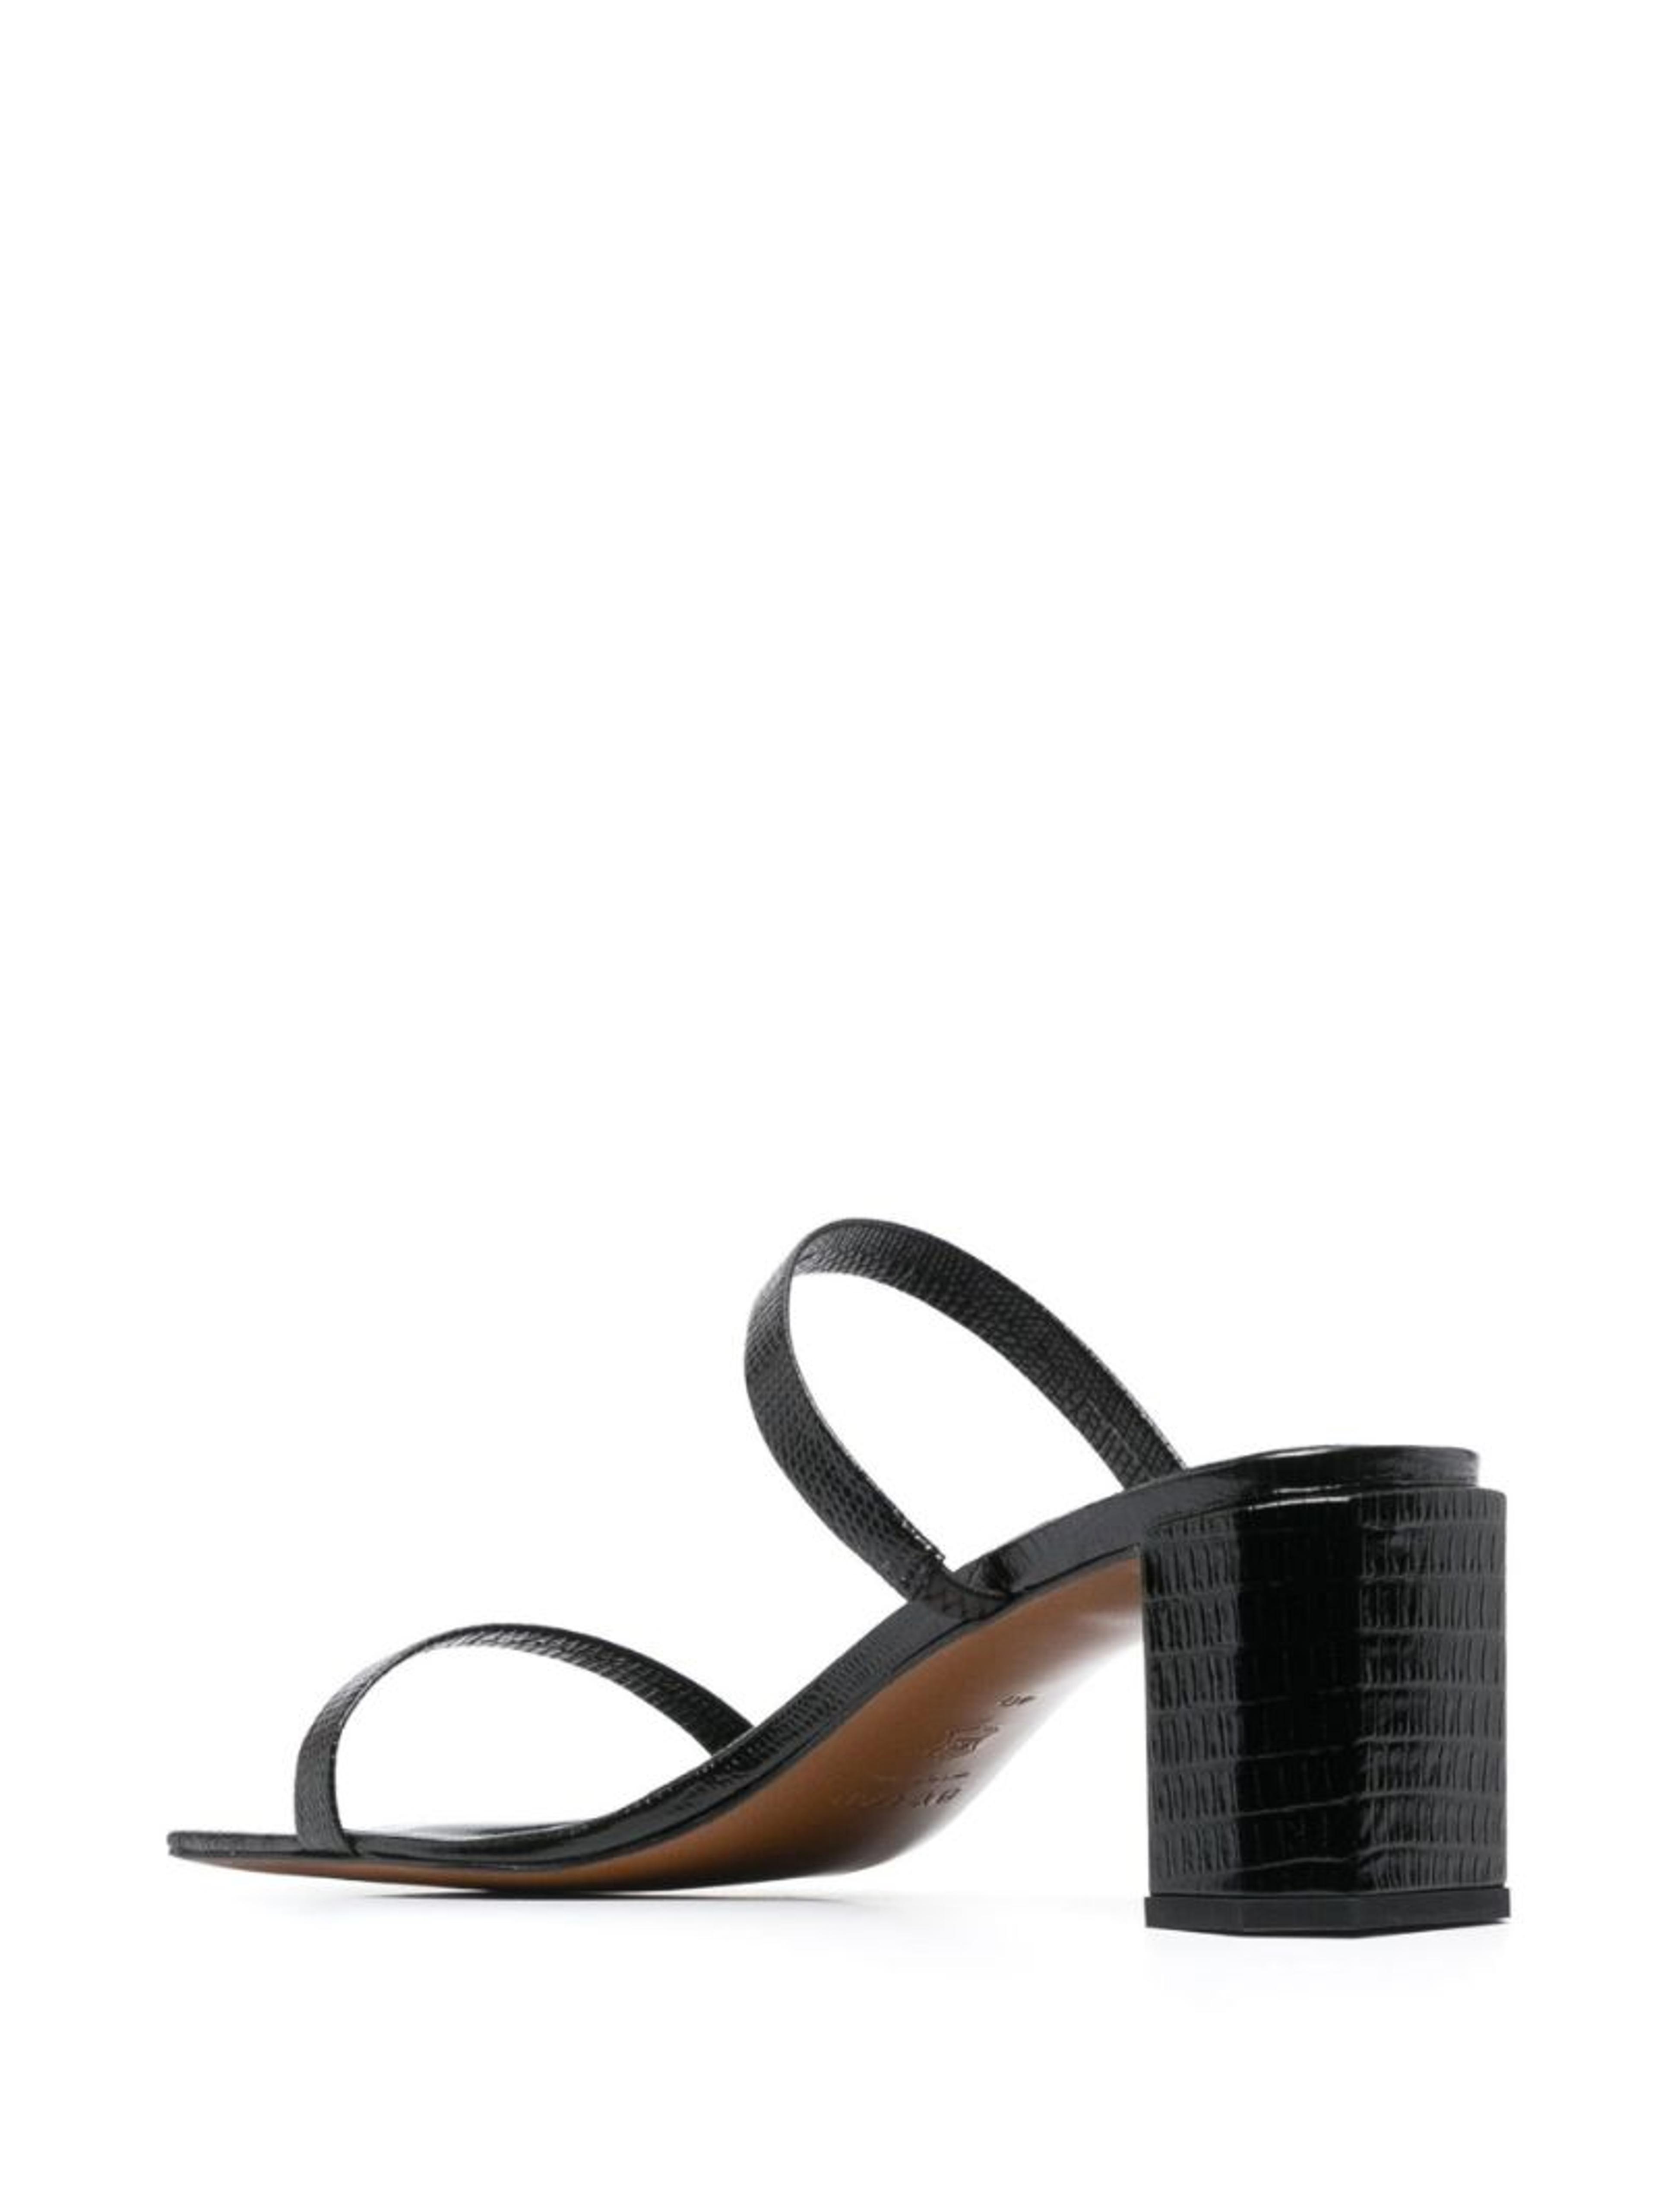 BY FAR black Tanya 60 leather sandals | Browns